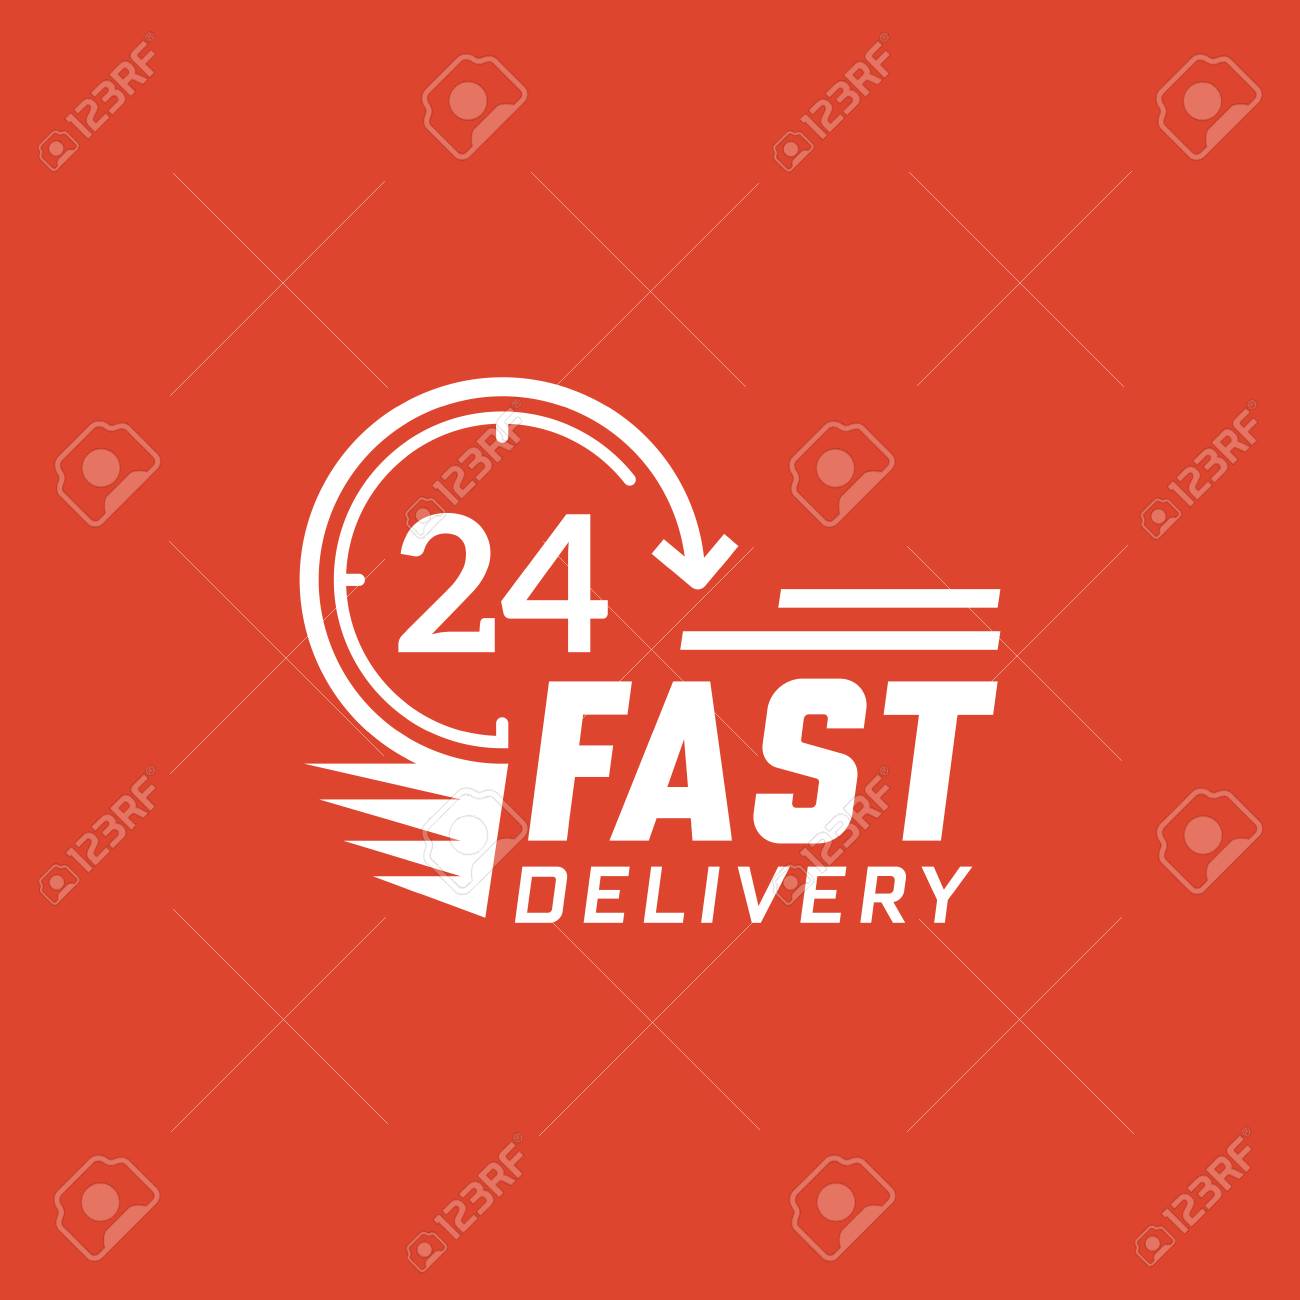 Fast Delivery Hour On Red Background Label For Online